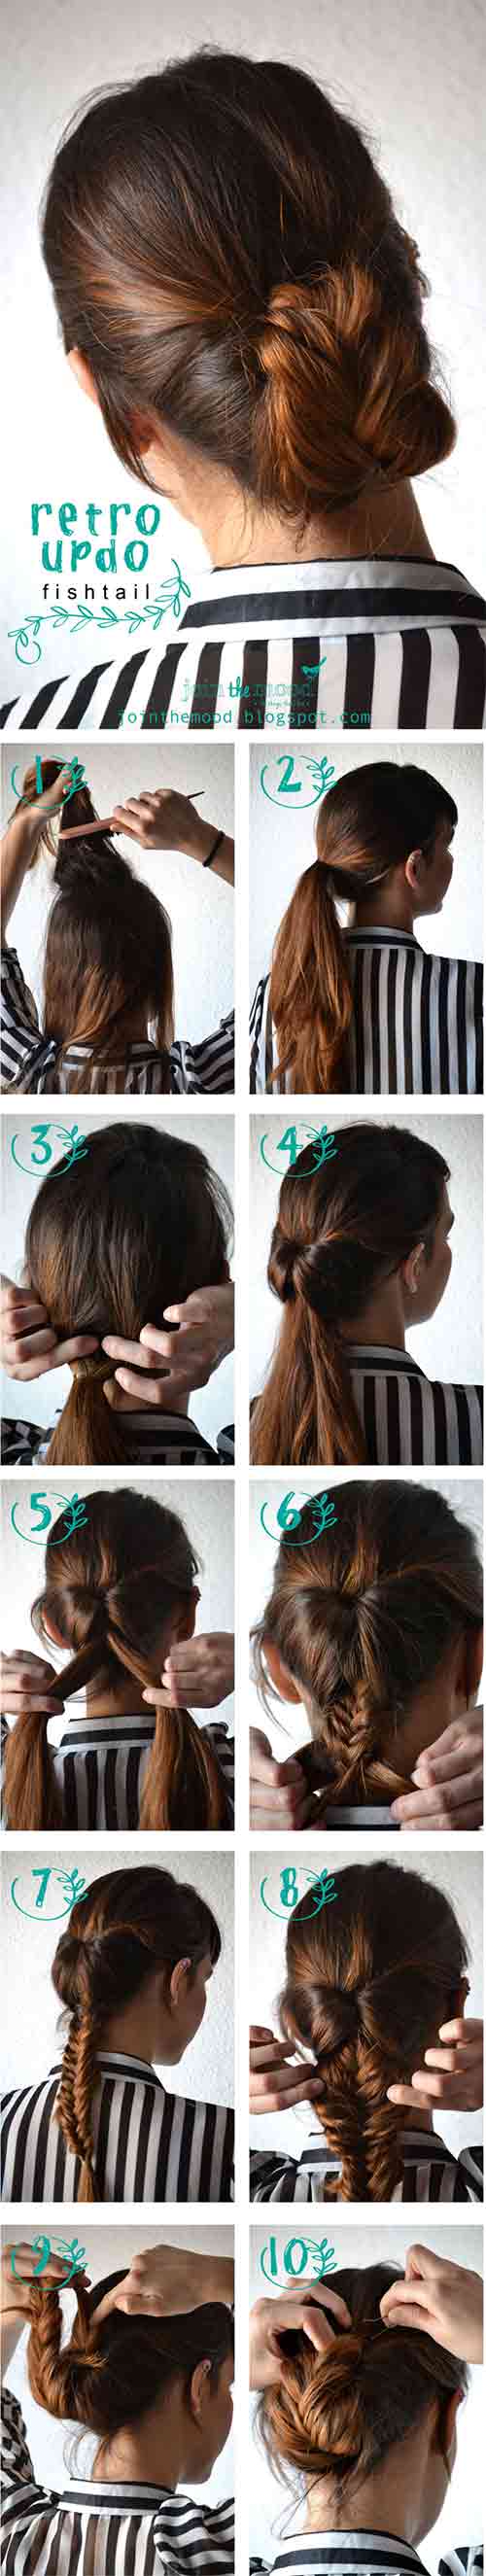 Retro fishtail updo hairstyle for long thin hair